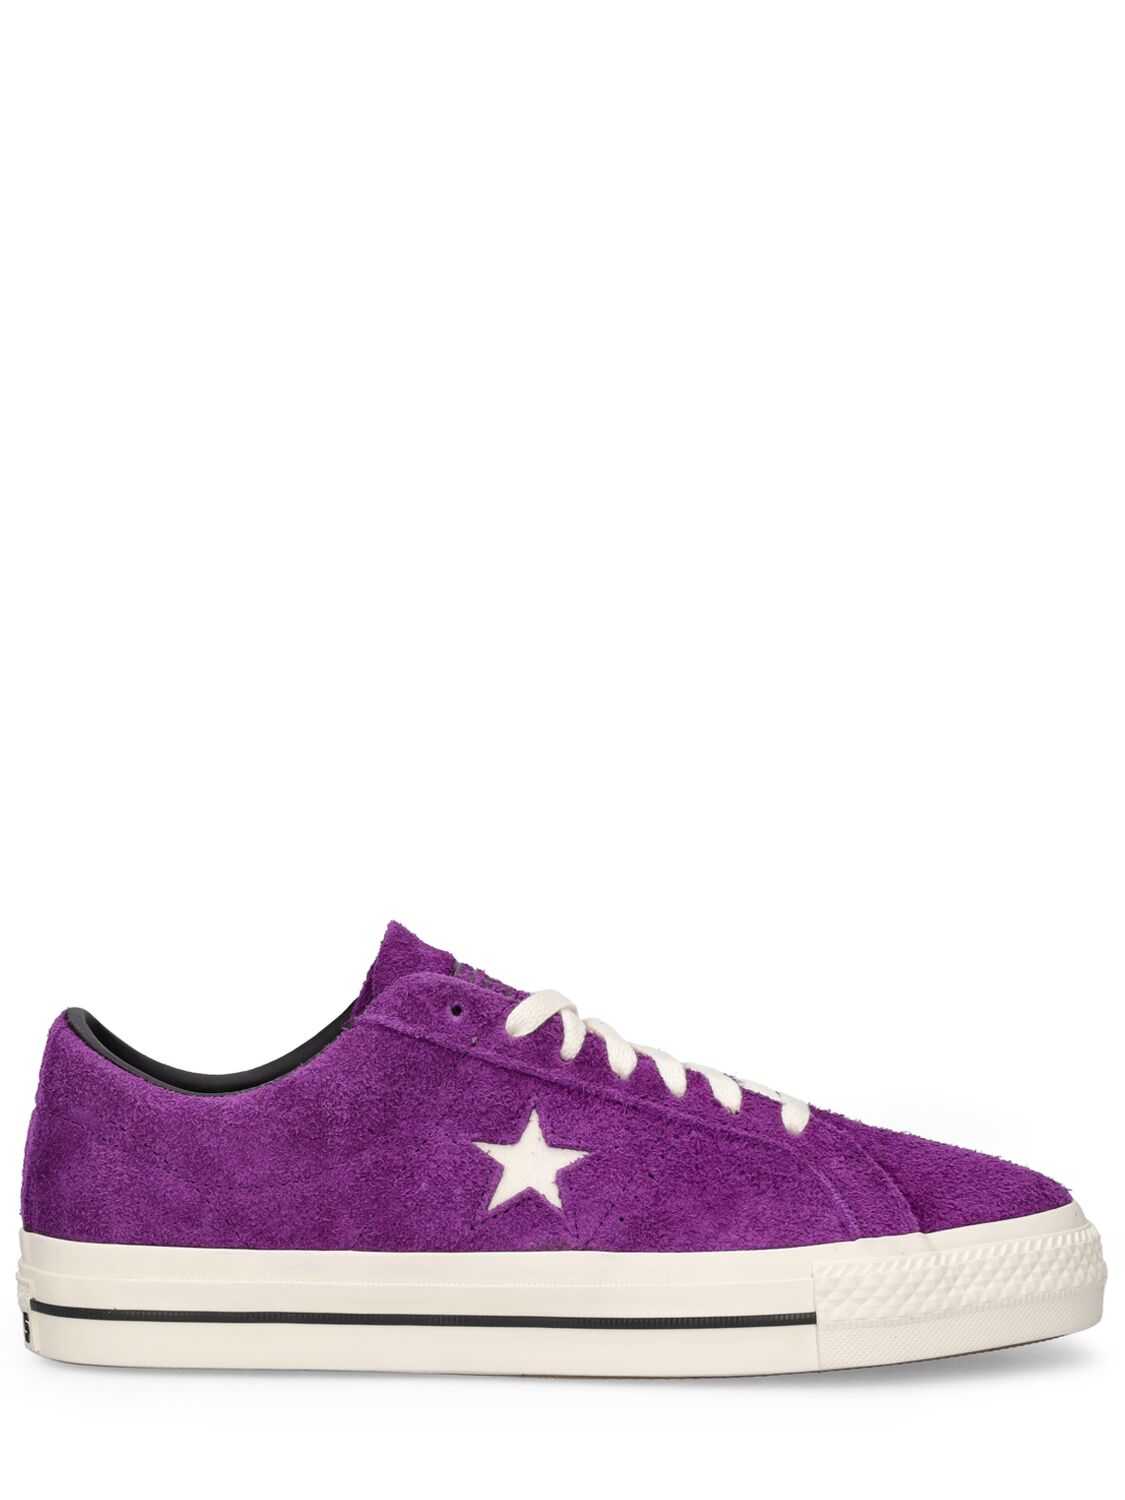 Image of One Star Pro Sneakers